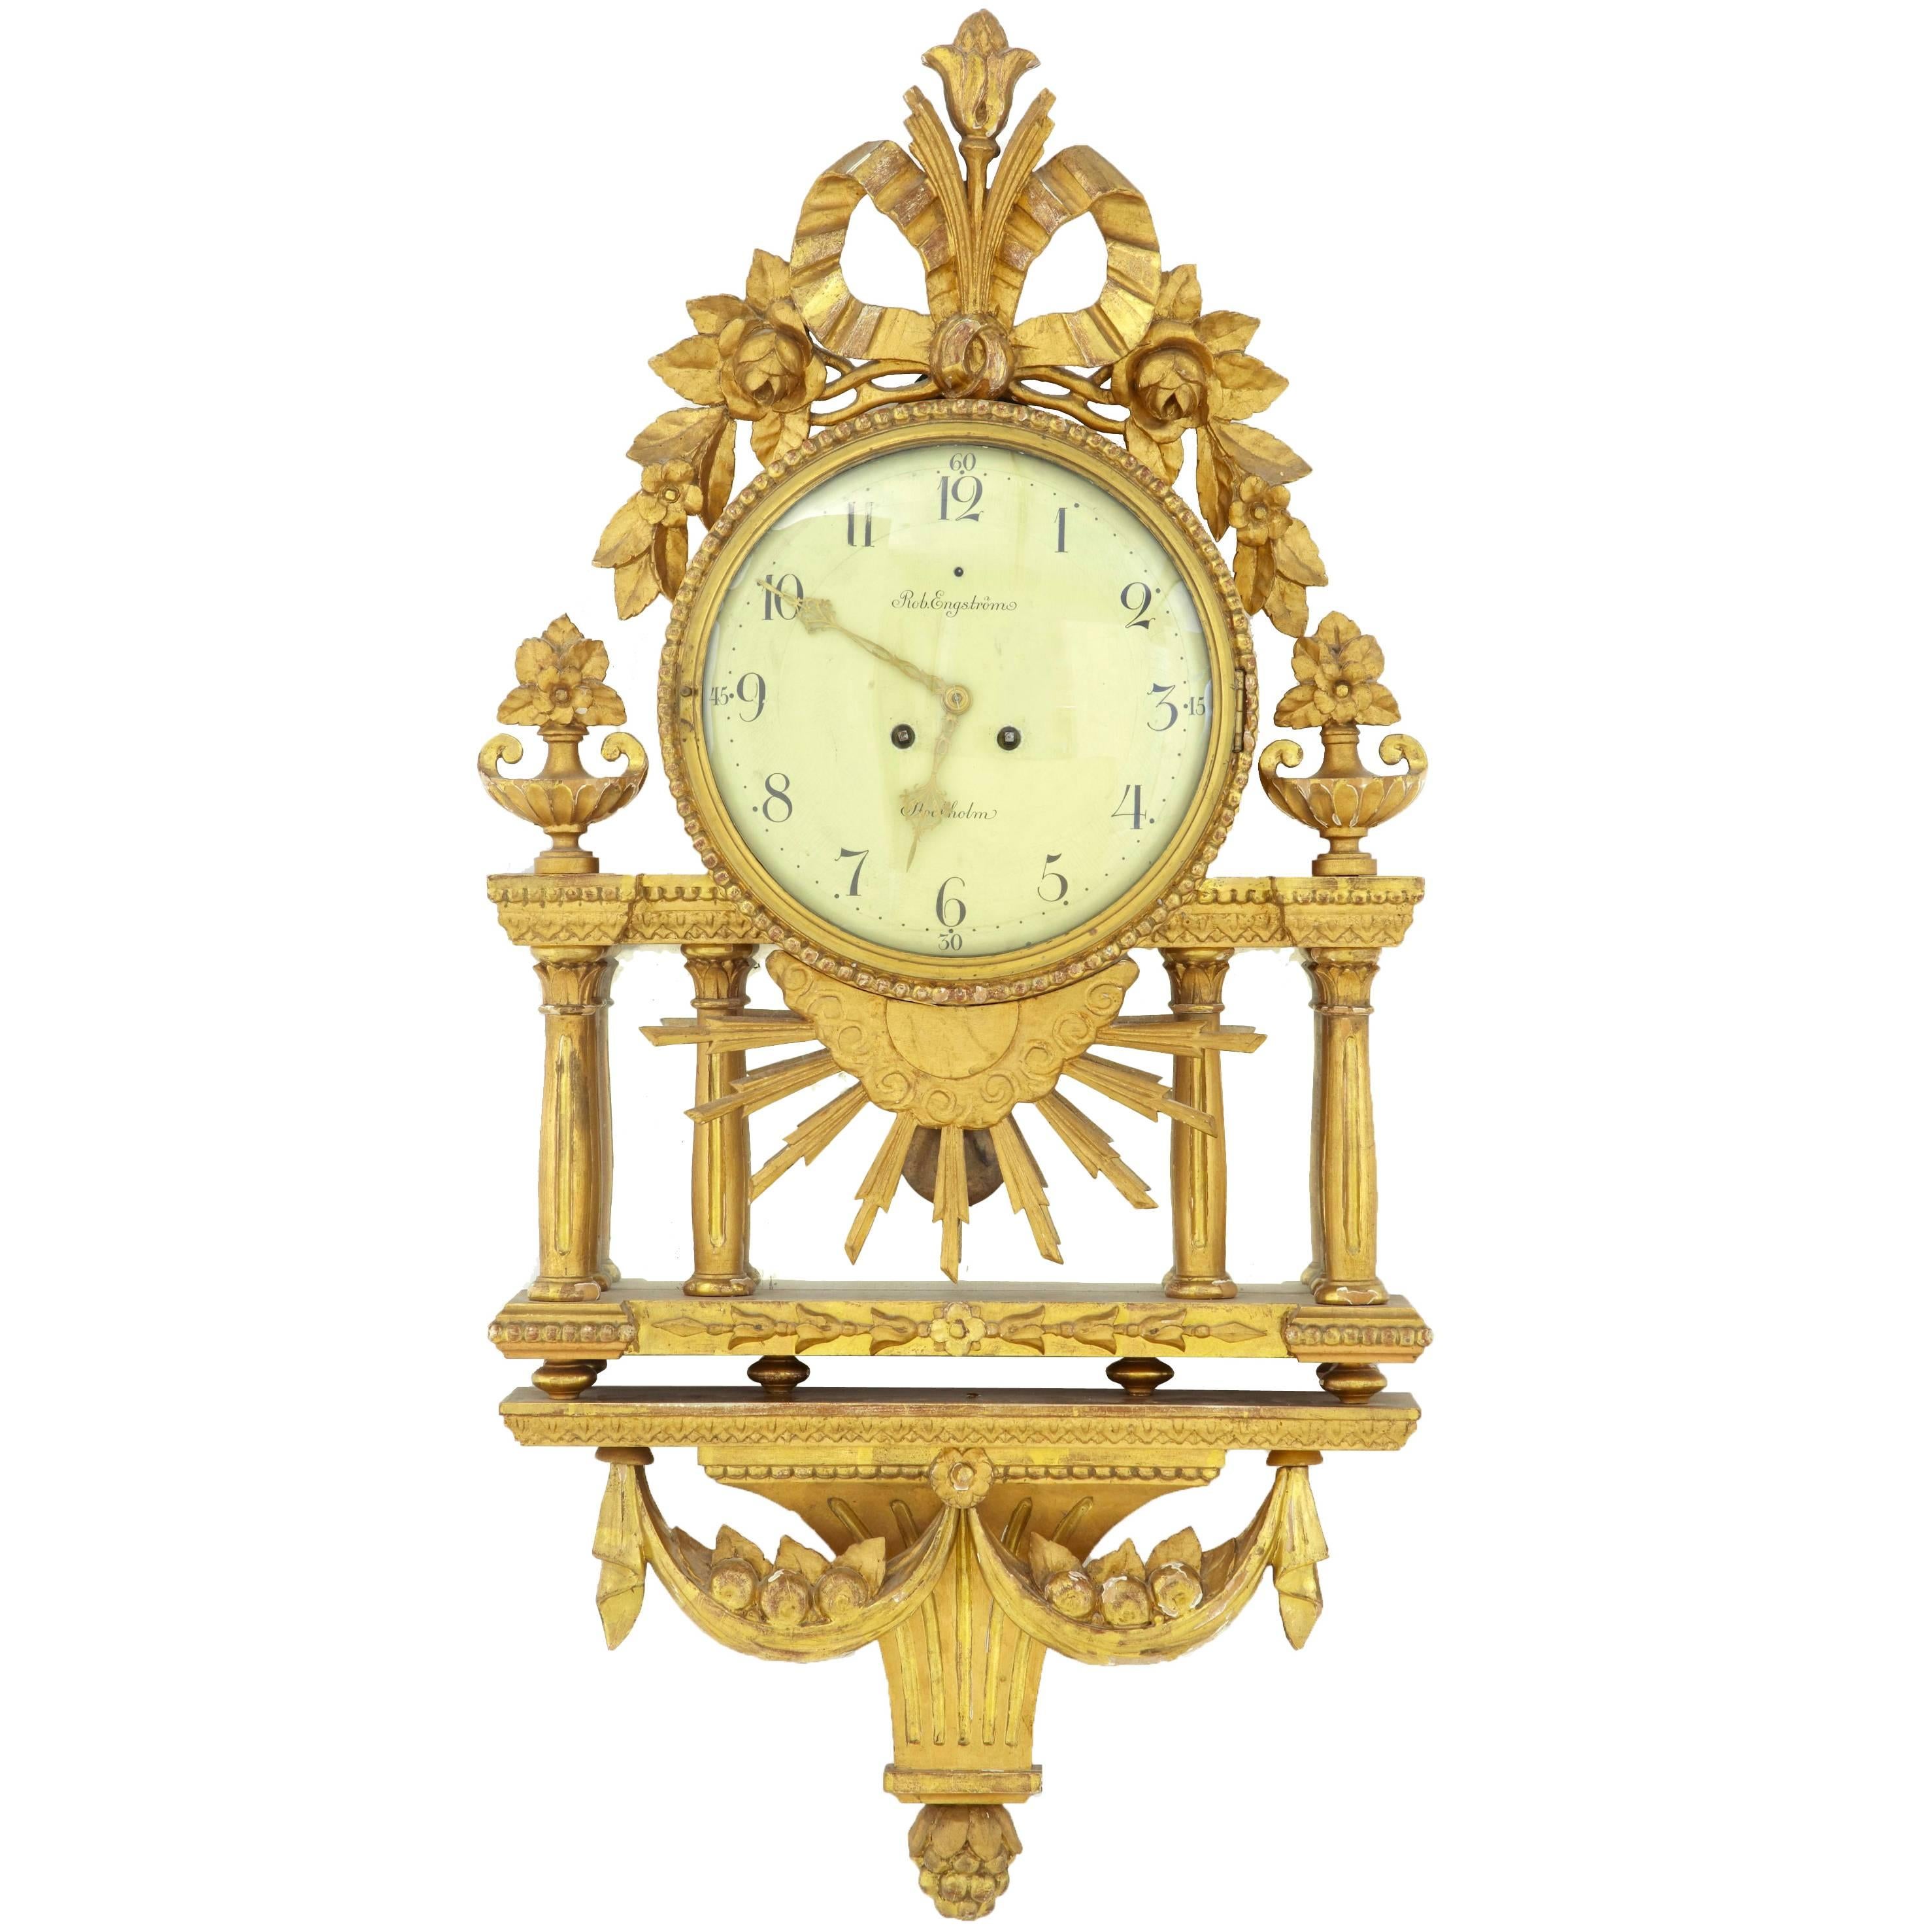 Late 19th Century Swedish Gilt Wall Clock by Rob Engstrom, Stockholm